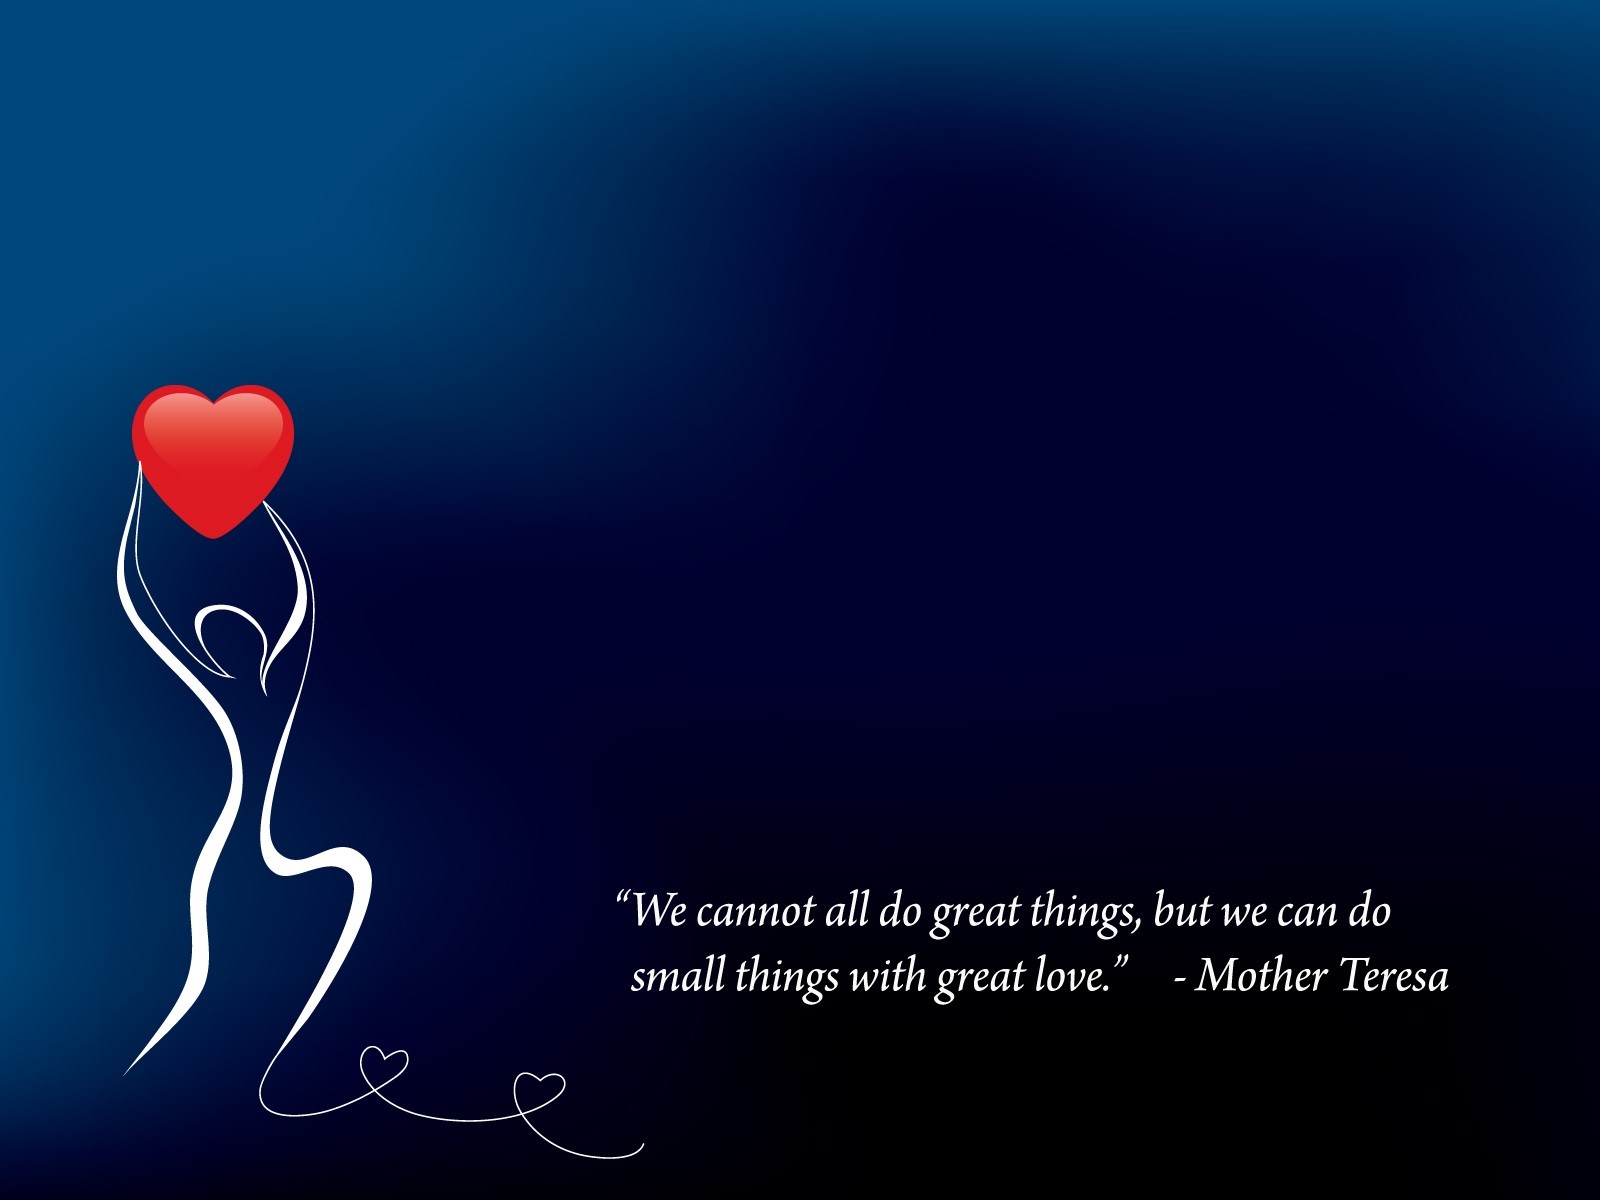 Mother Teresa Latest Quotes On Love Images - Attitude My Life My Rules Quotes - HD Wallpaper 